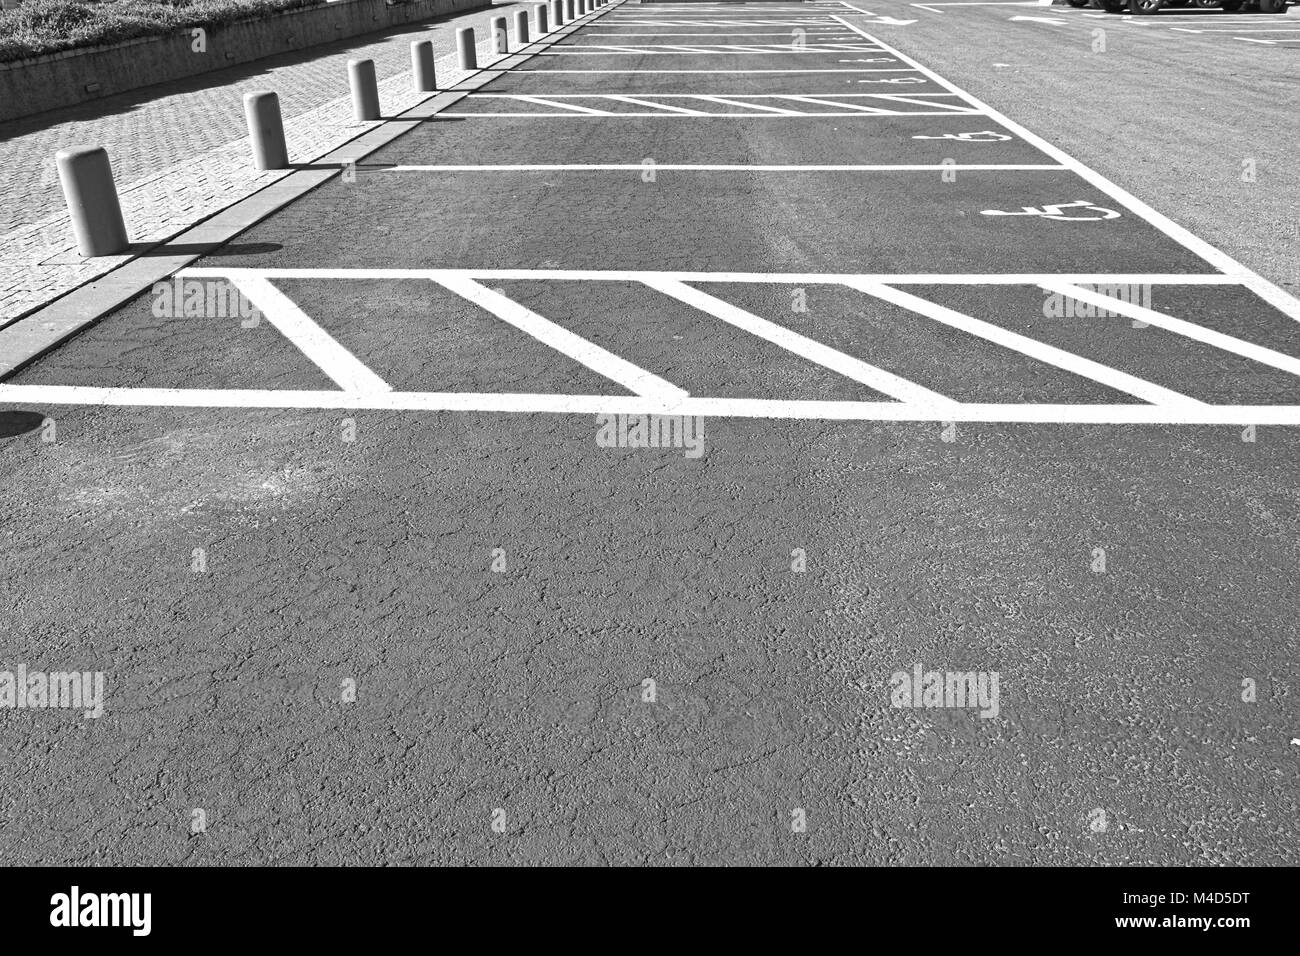 Parking for Disabled People Stock Photo